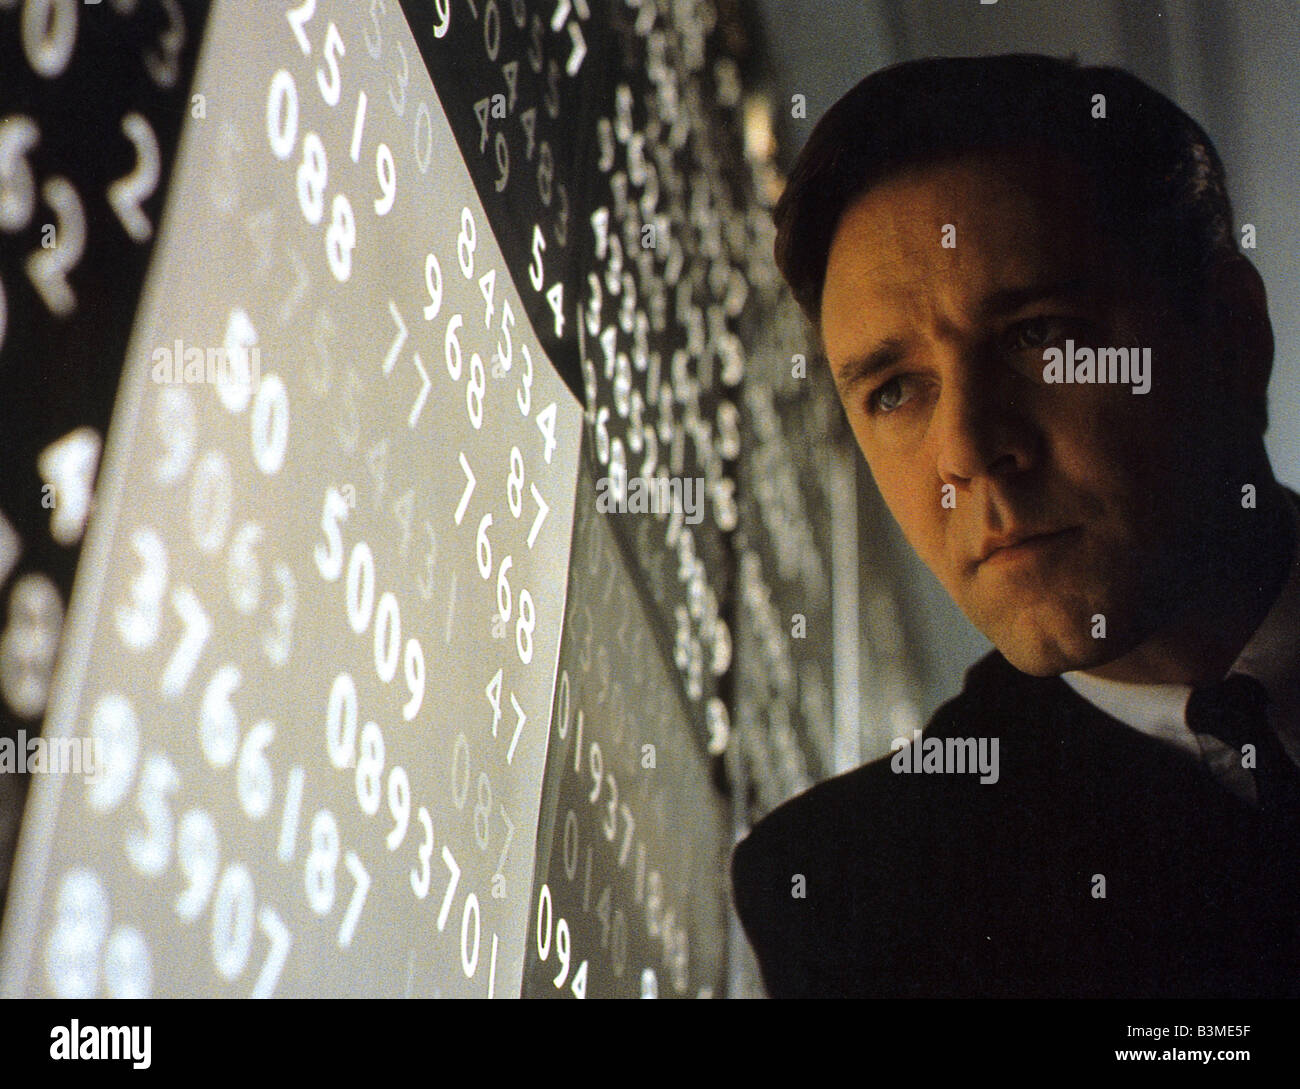 A BEAUTIFUL MIND 2001 Universal/DreamWorks film with Russell Crowe Stock Photo